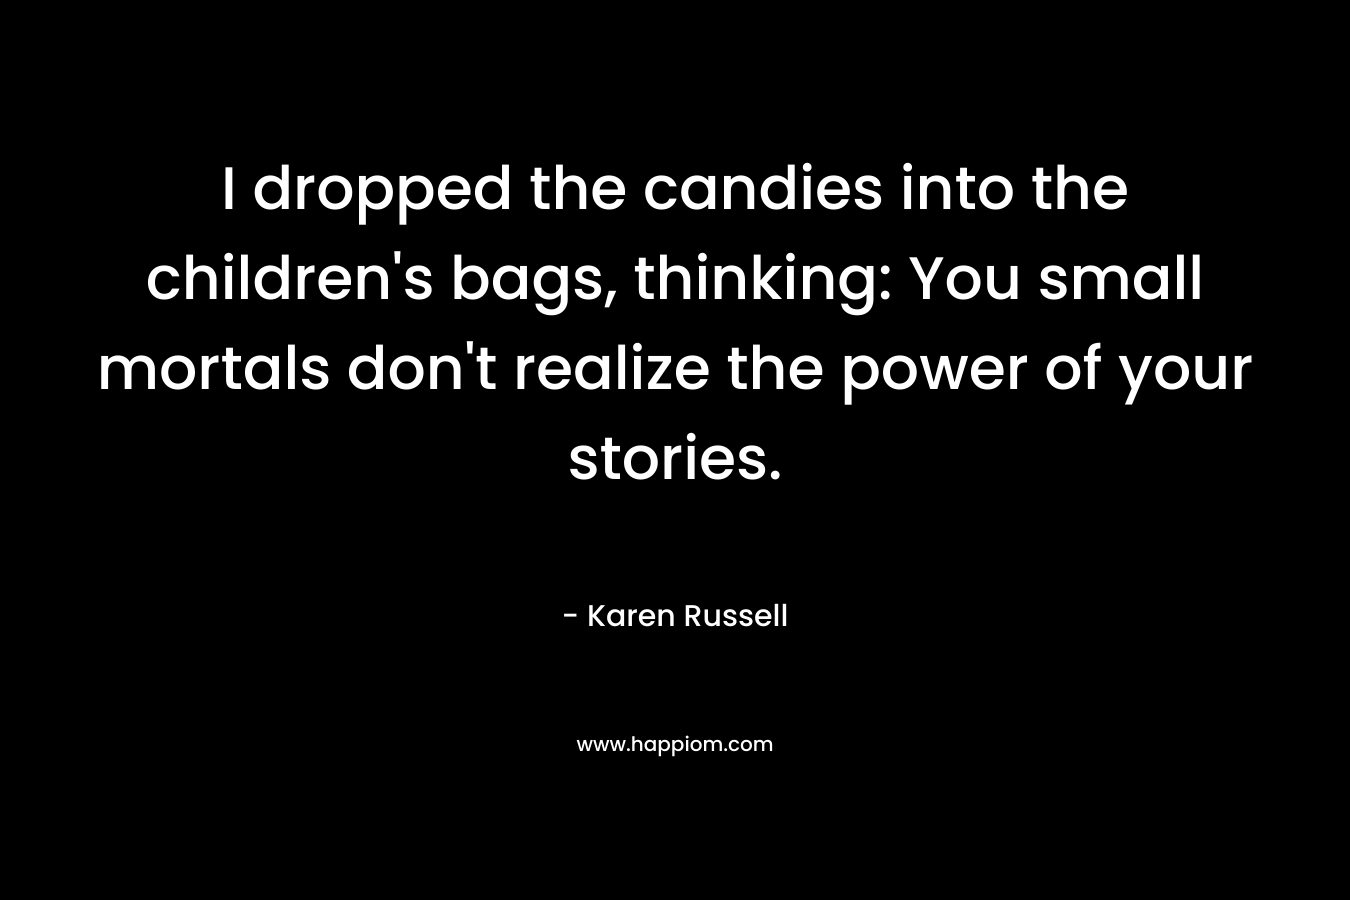 I dropped the candies into the children’s bags, thinking: You small mortals don’t realize the power of your stories. – Karen Russell